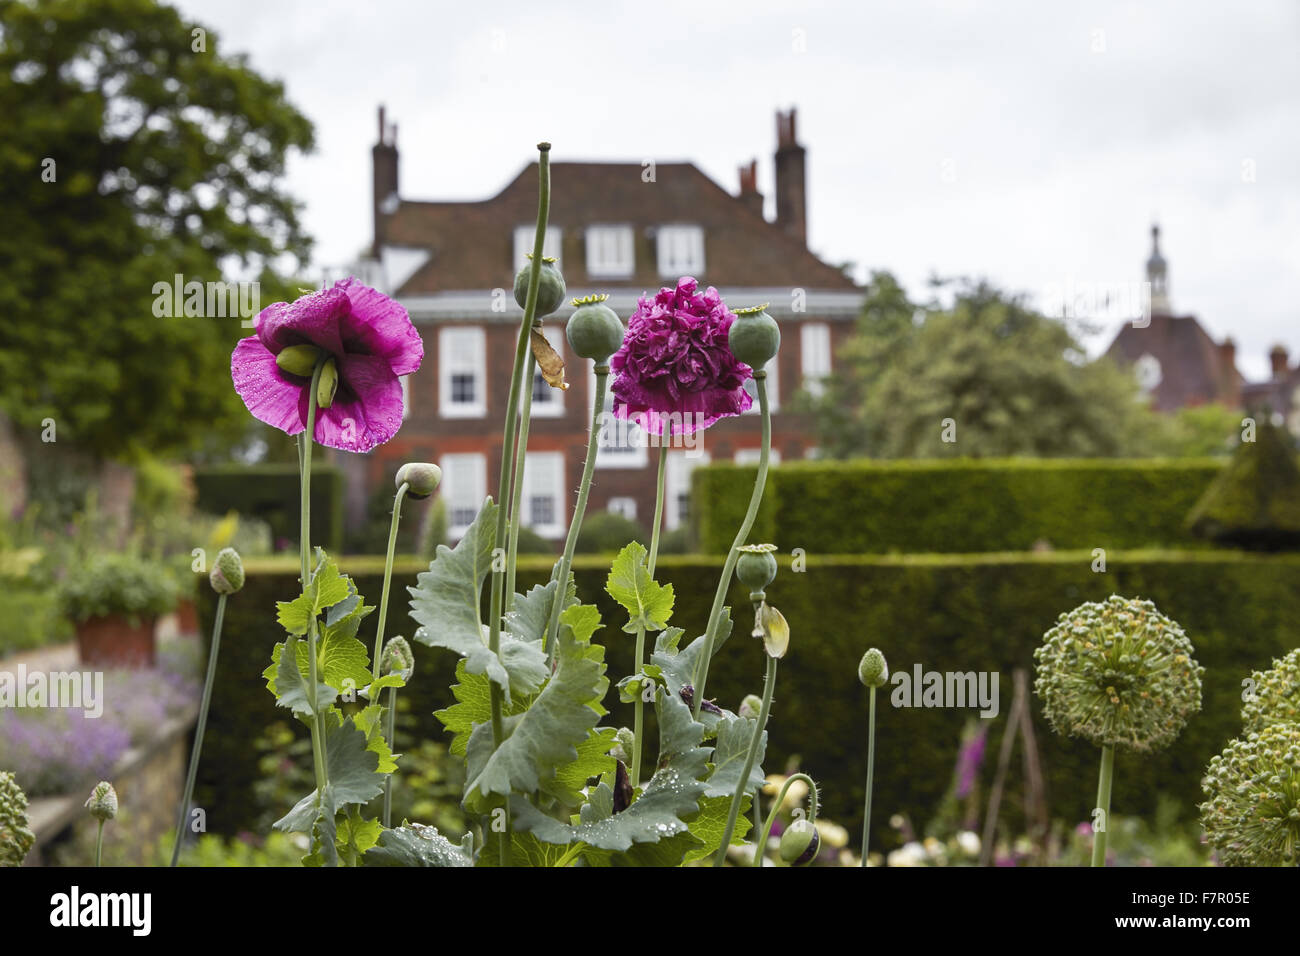 The garden at Fenton House and Garden, London. Fenton House was built in 1686 and is filled with world-class decorative and fine art collections. The gardens include an orchard, kitchen garden, rose garden and formal terraces and lawns. Stock Photo